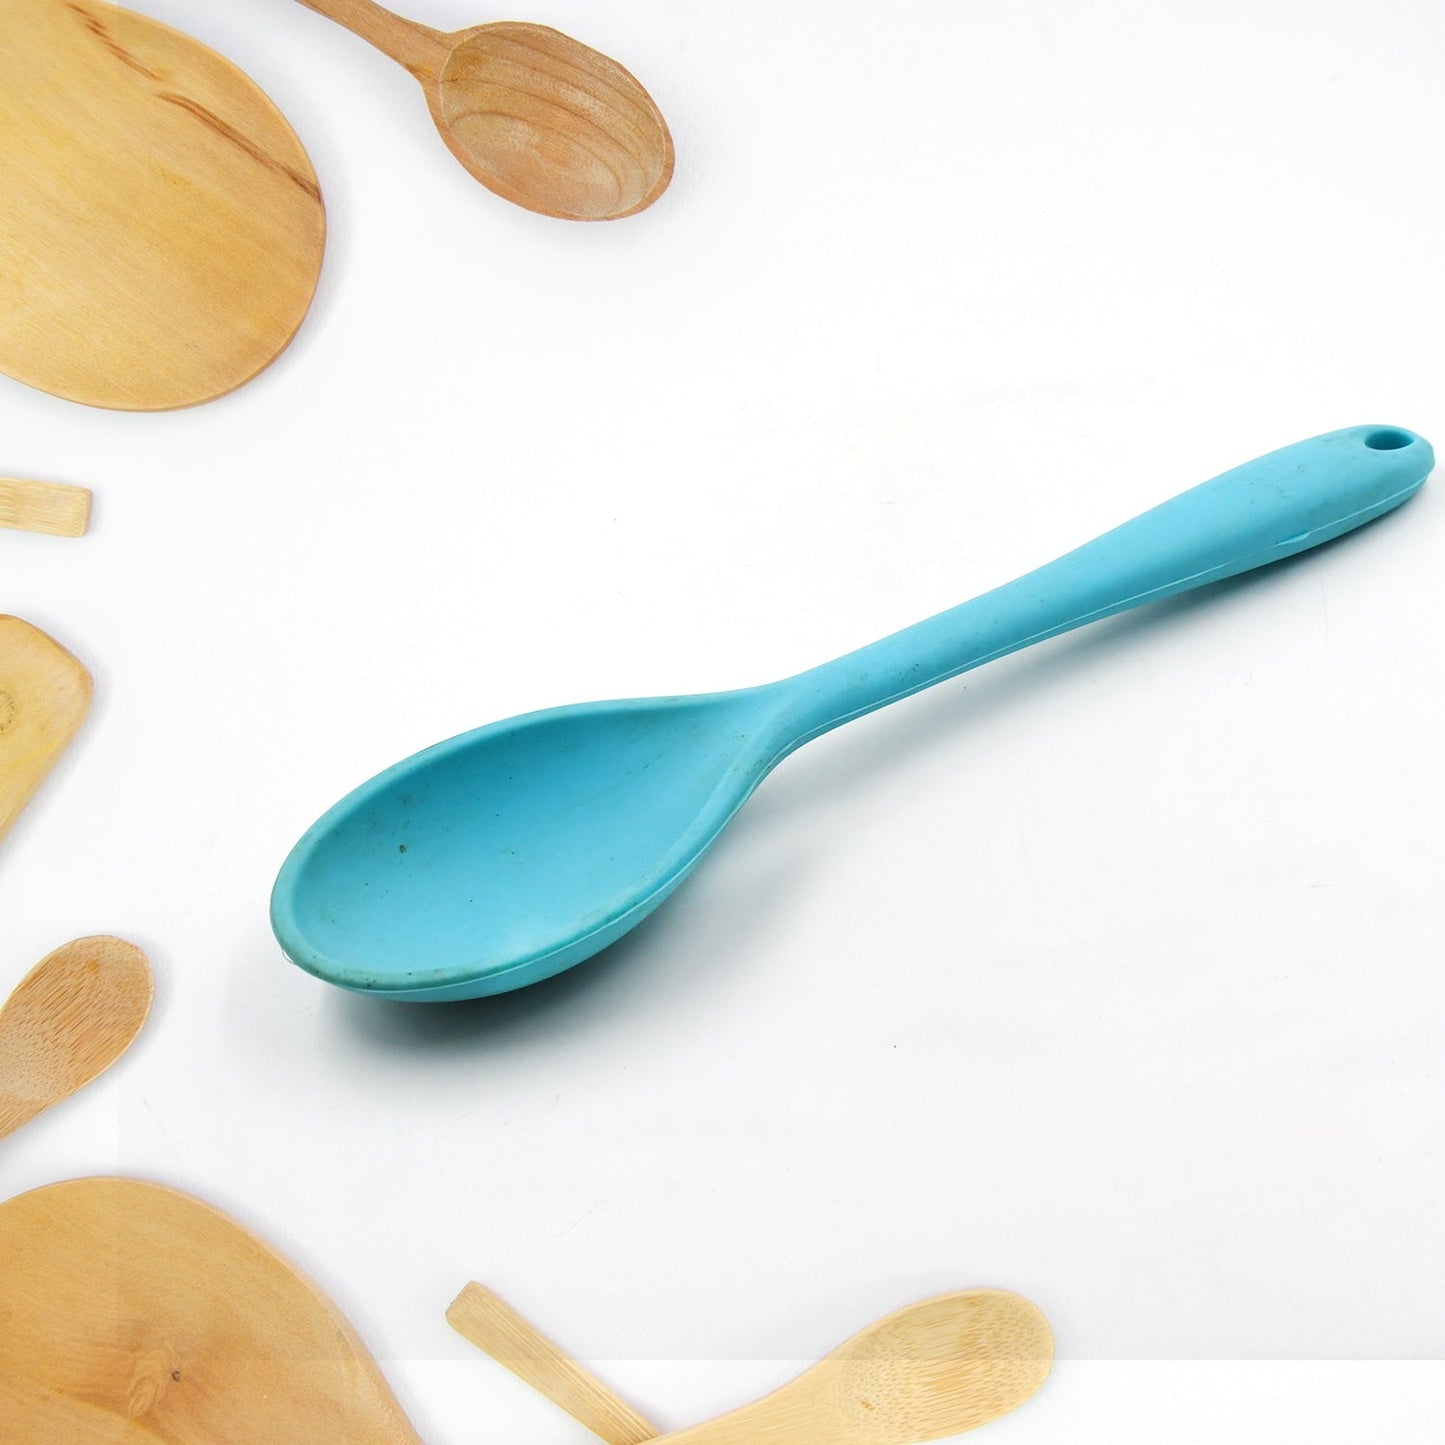 Large Silicone Spoon for Baking, Serving, Basting - Heat Resistant, Non Stick Utensil Spoon (27cm)